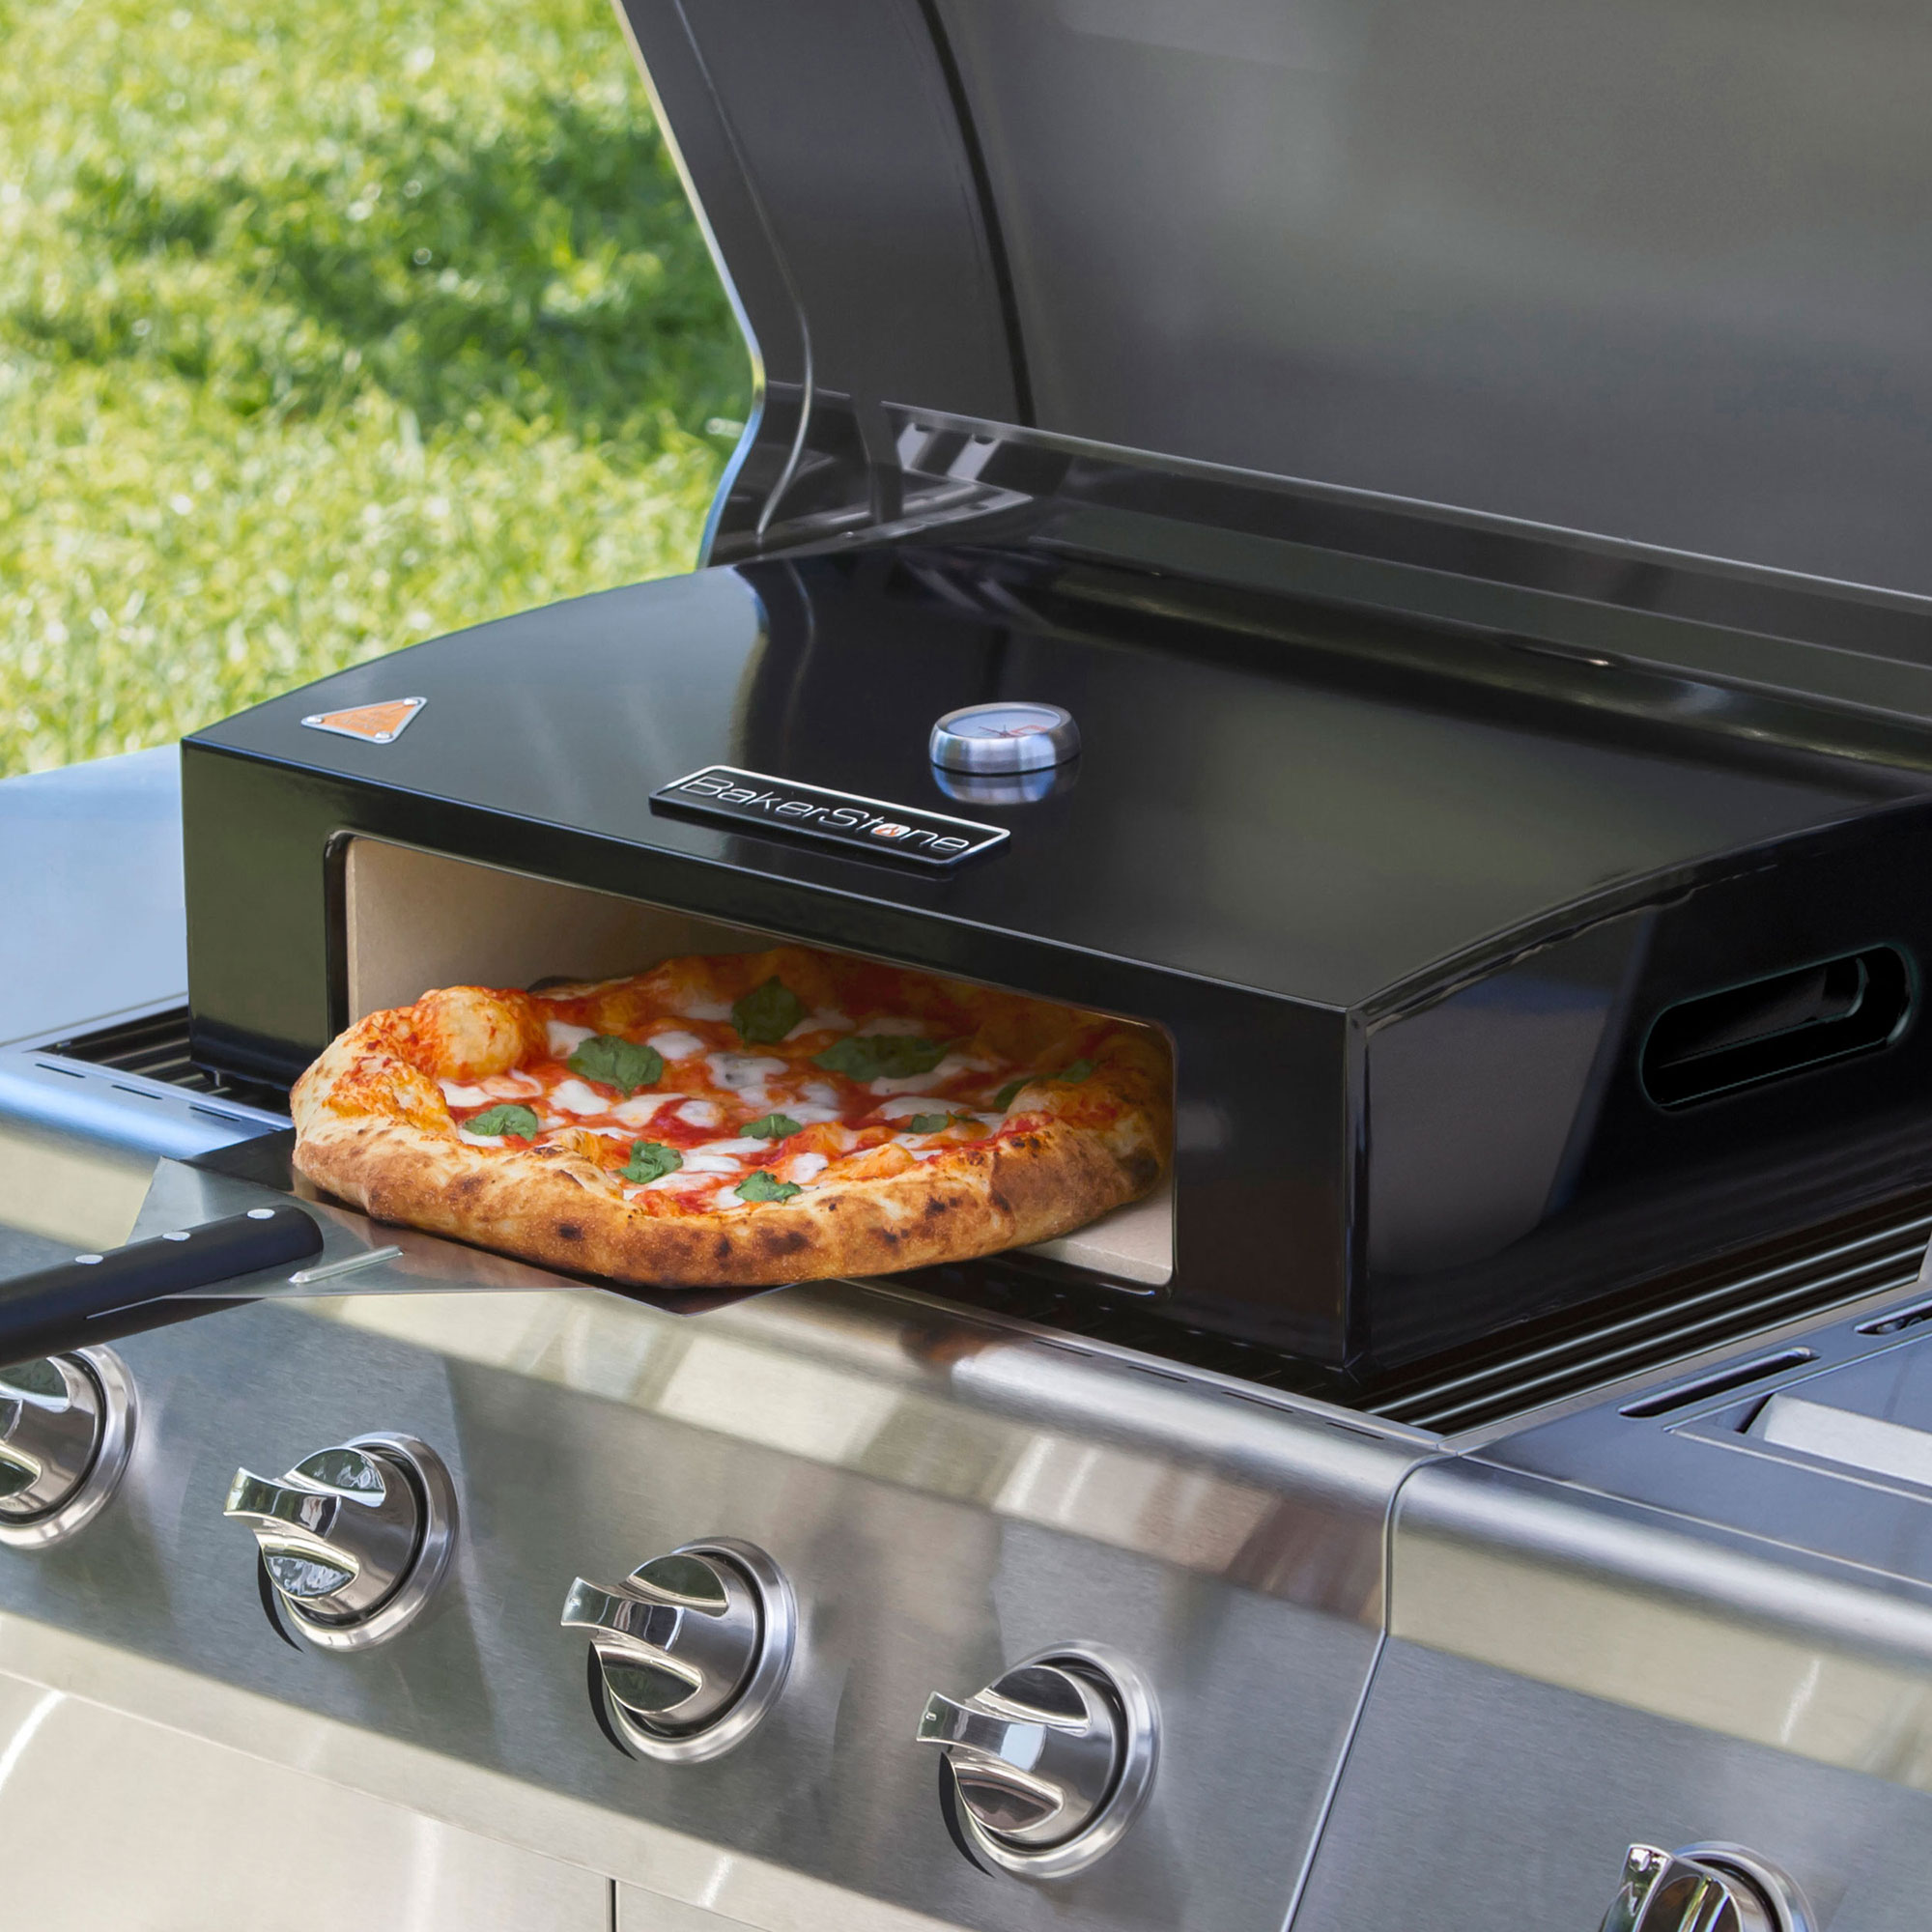 BakerStone Original Series Grill Top Pizza Oven Box - image 5 of 5